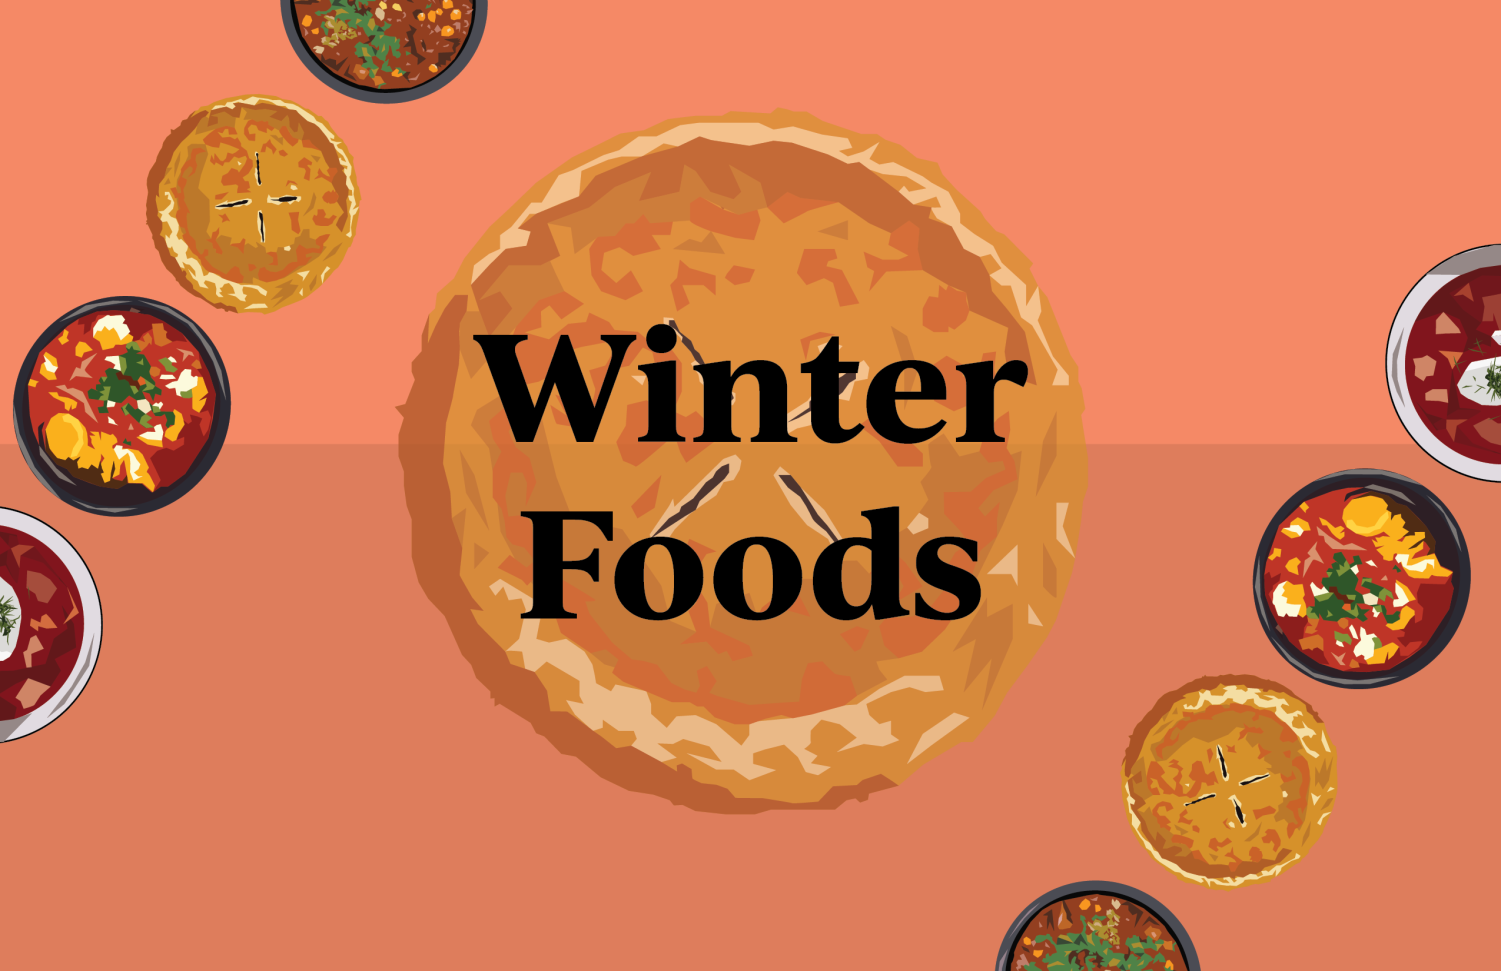 As the holiday season passes, students, staff discuss cultural foods